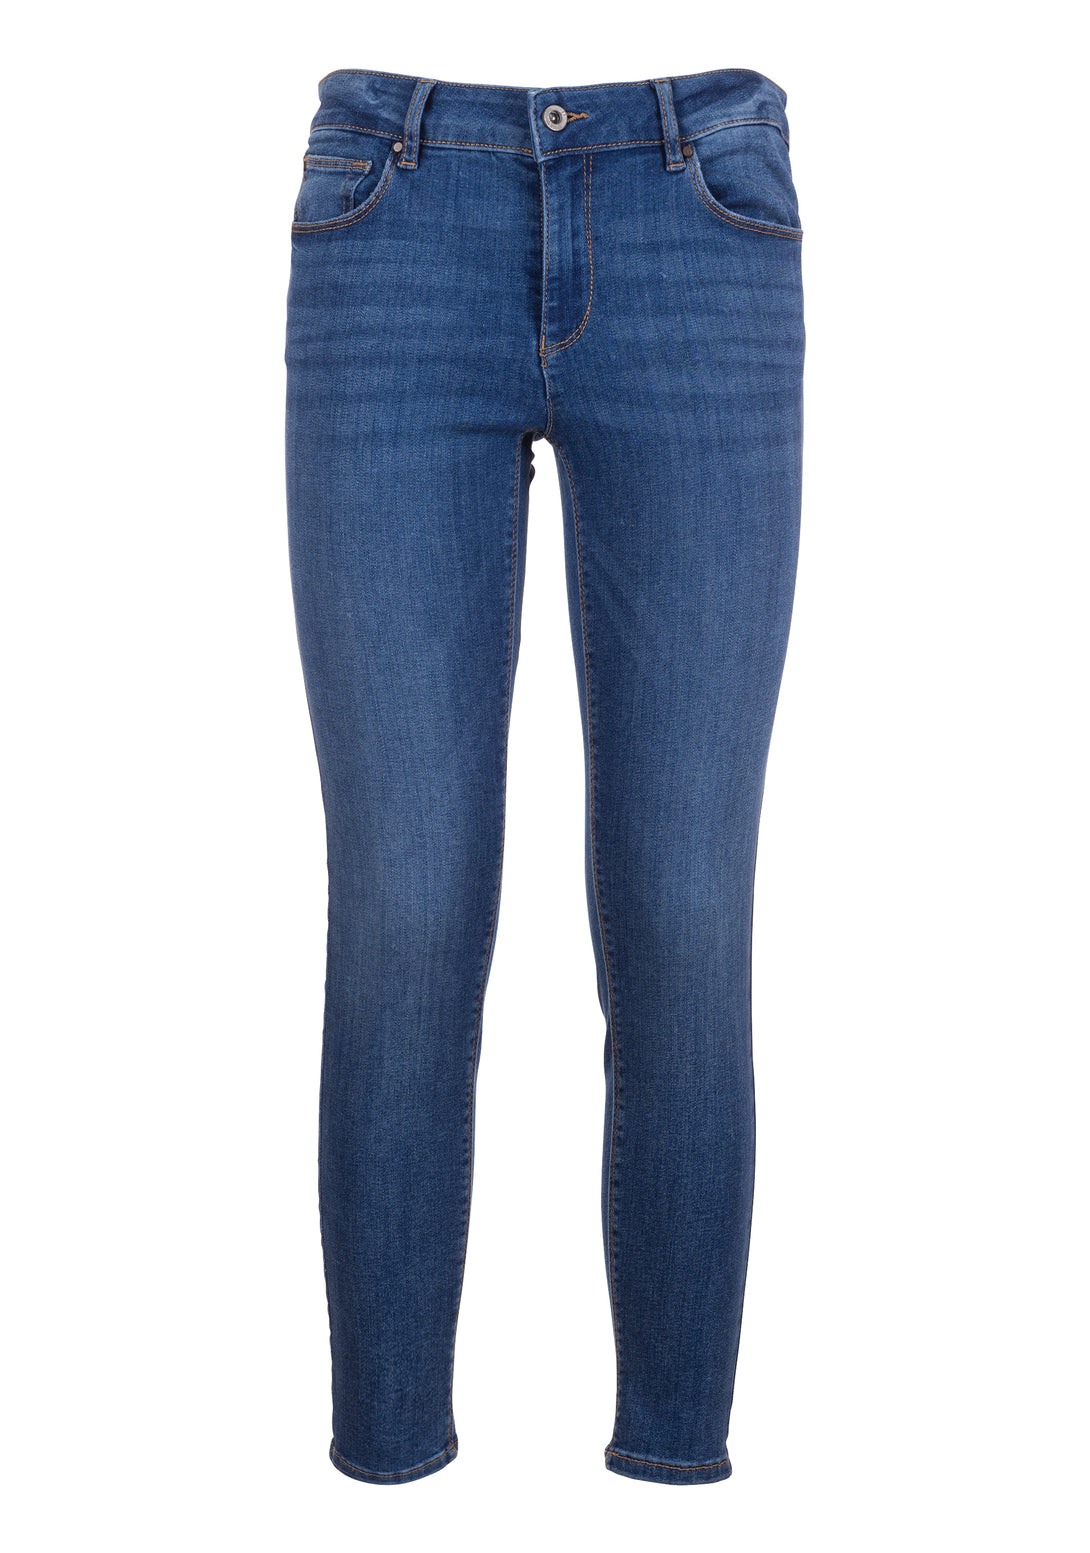 Jeans skinny fit with push-up effect made in denim with middle wash